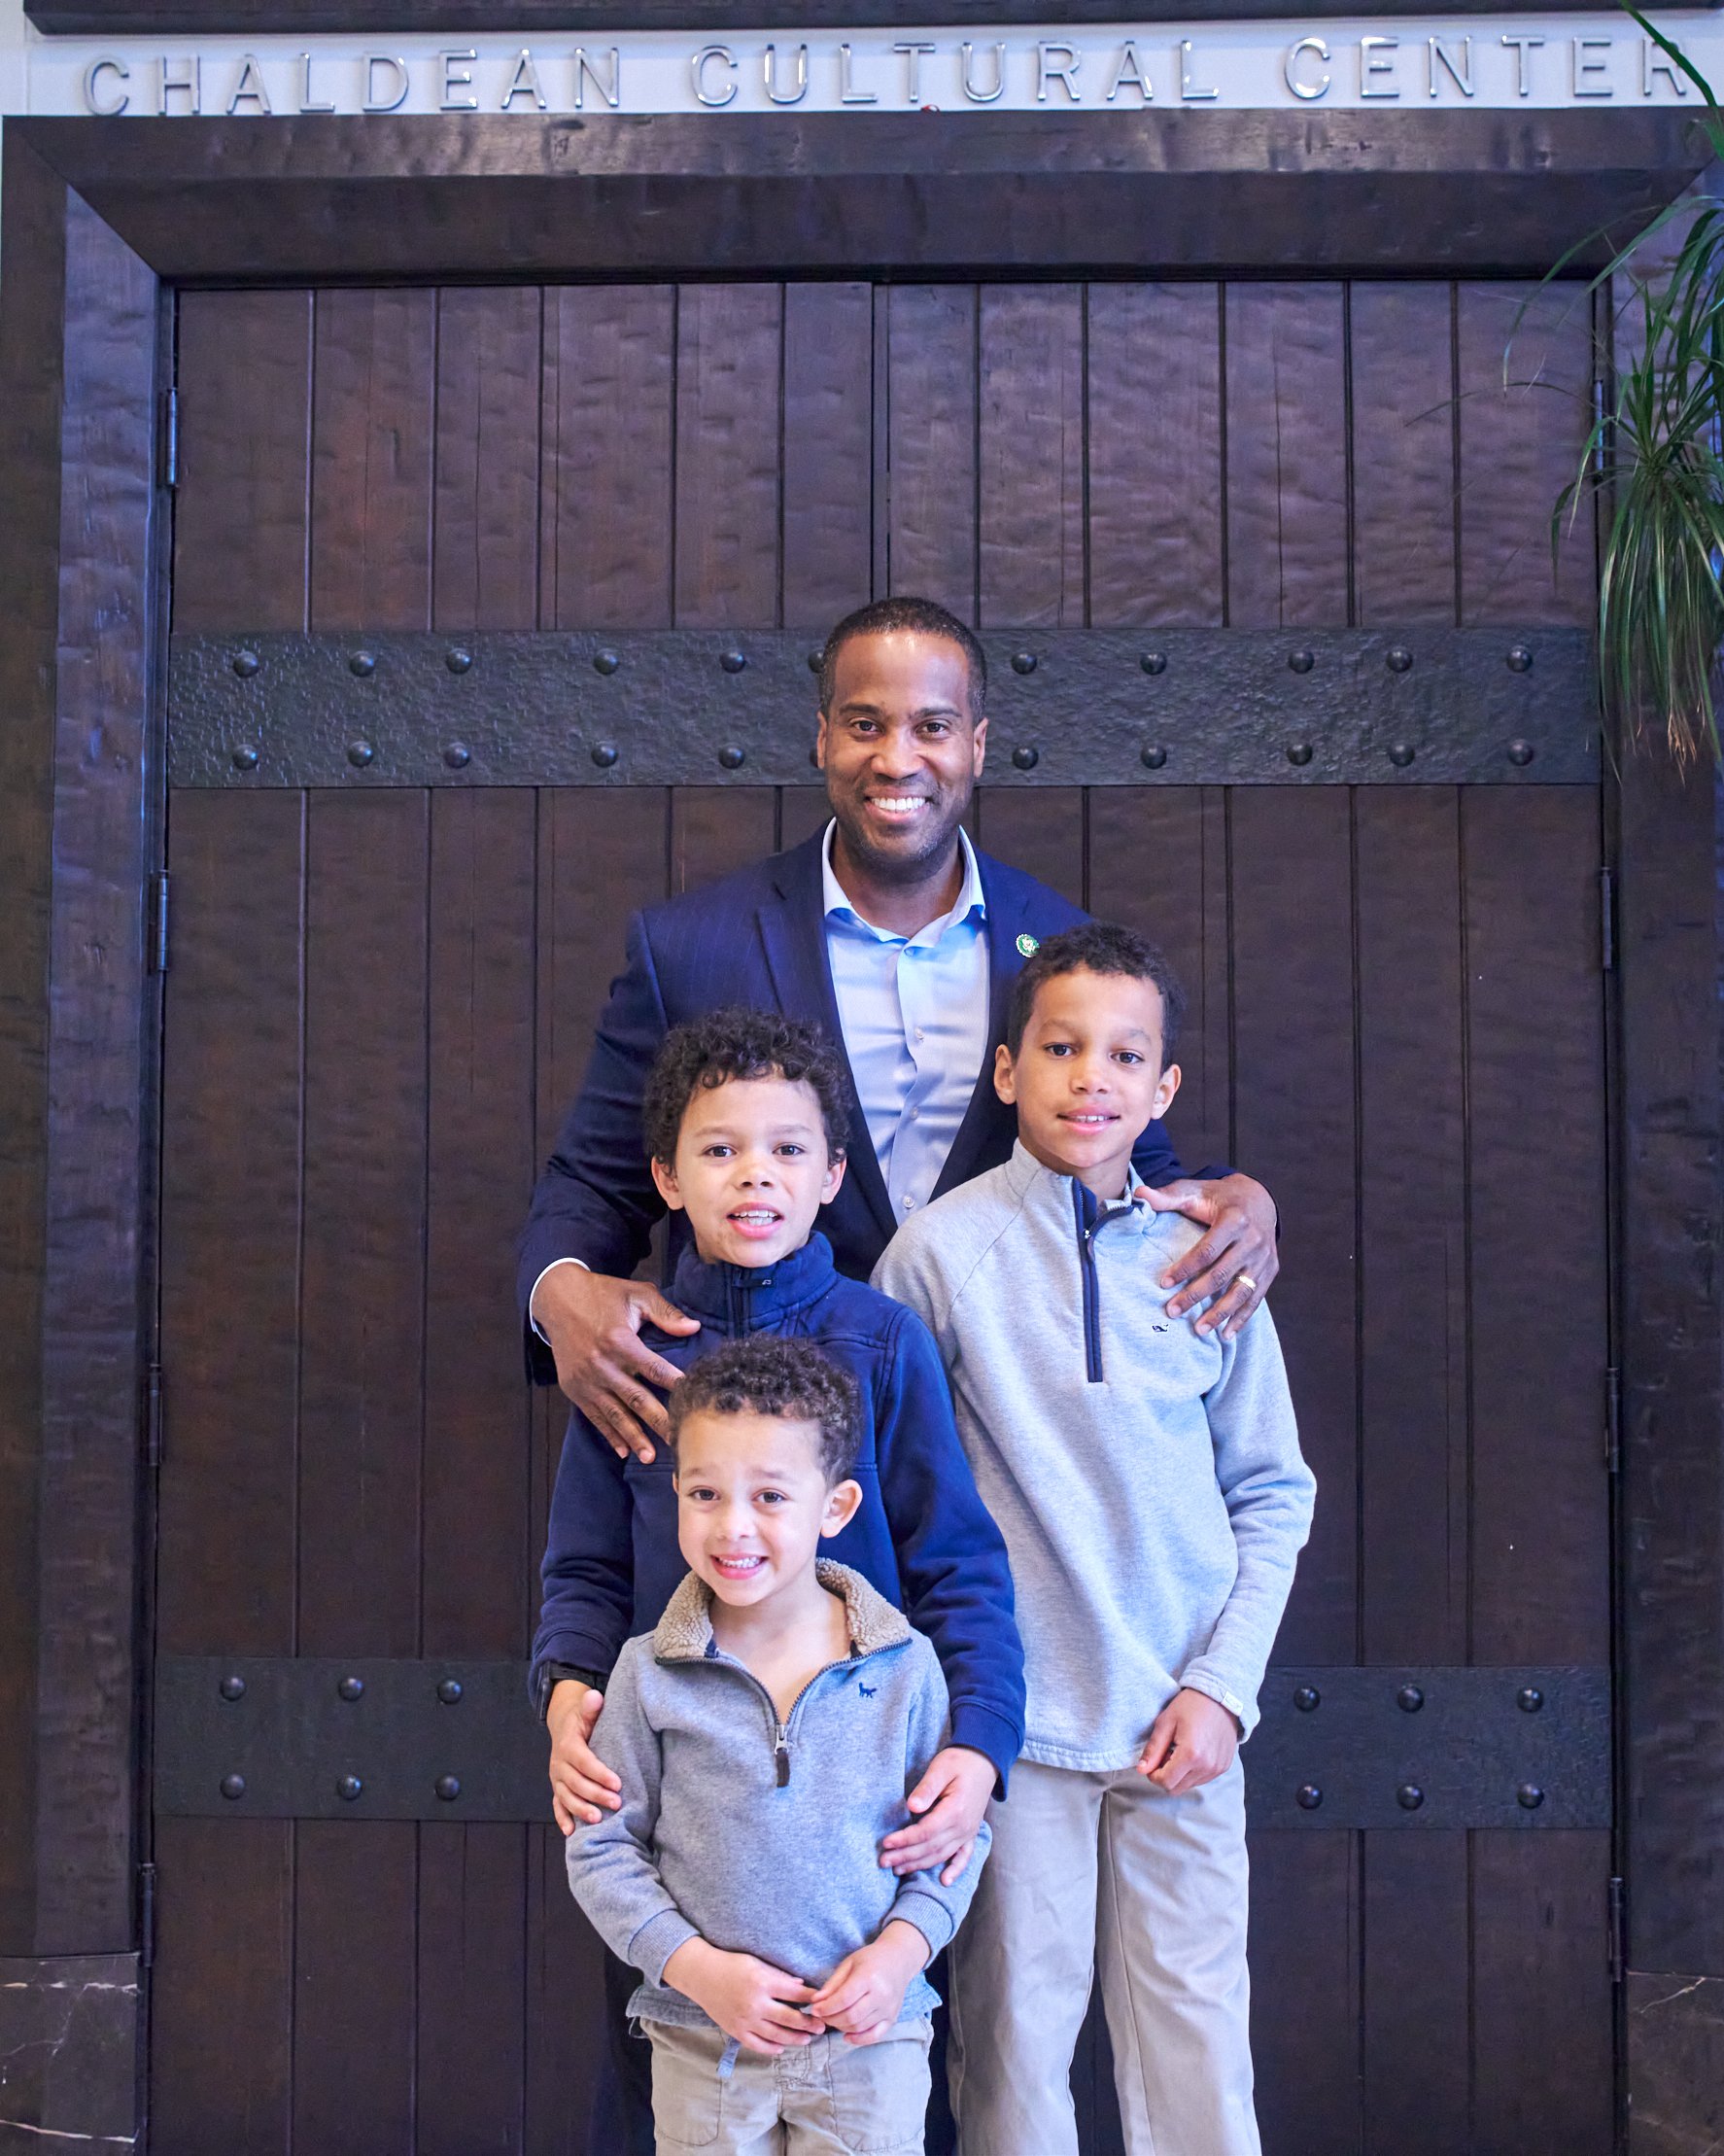  Congressman John James and his three children outside the Chaldean Cultural Center in Shenandoah Country Club.  